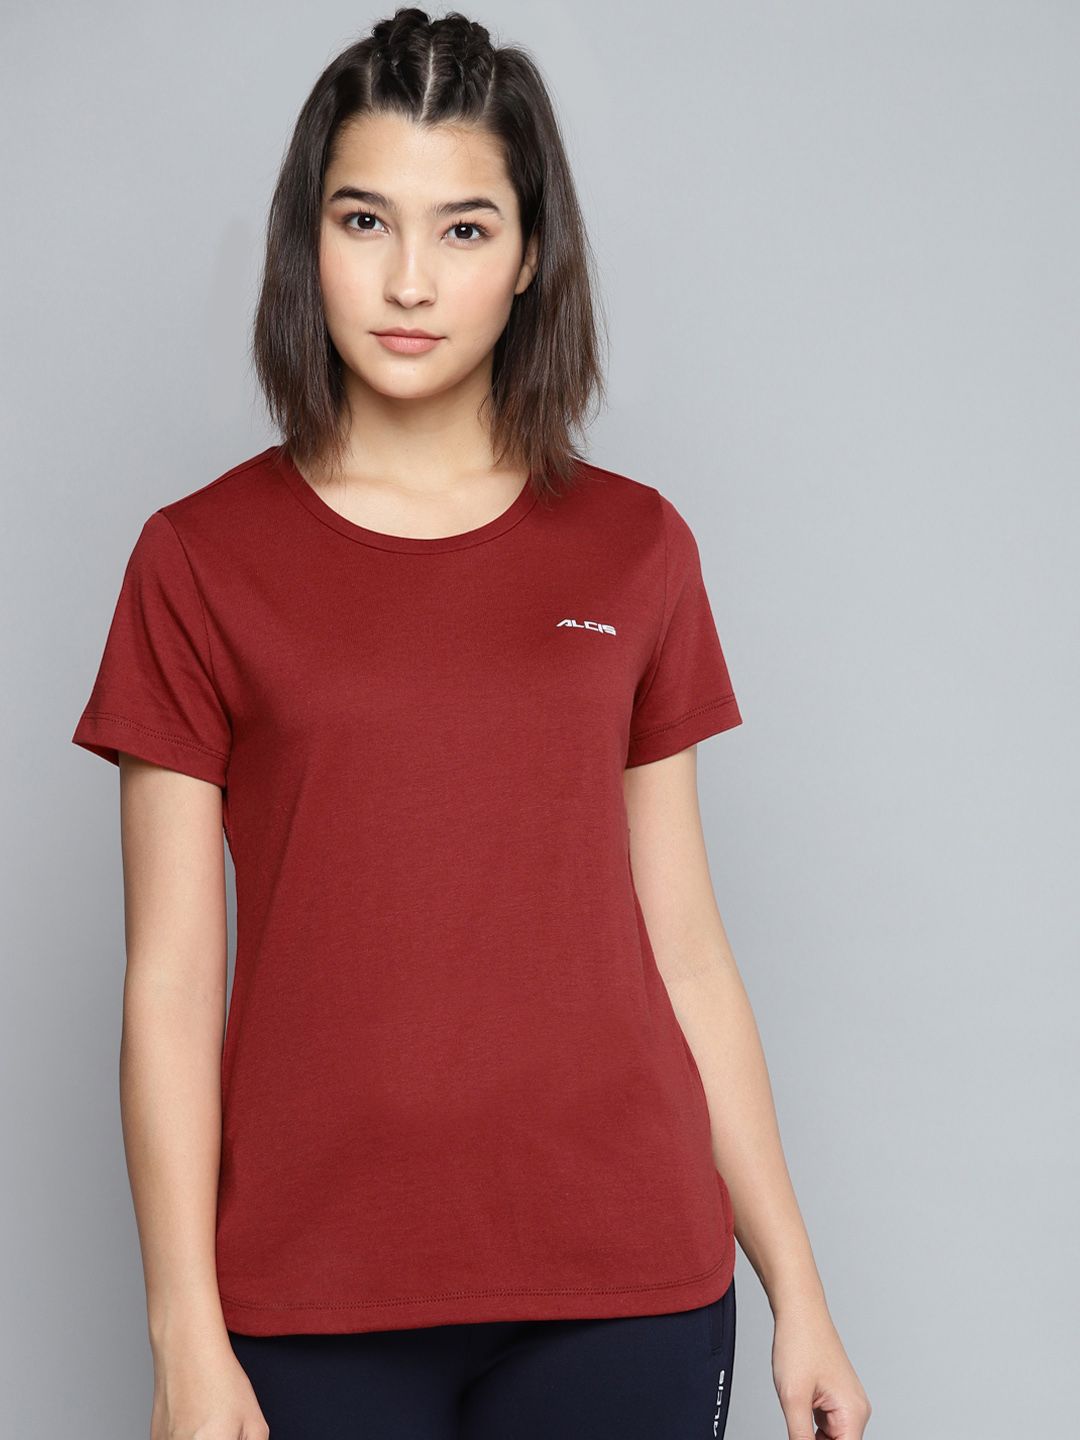 Alcis Women Maroon Slim Fit Solid Round Neck T-shirt Price in India